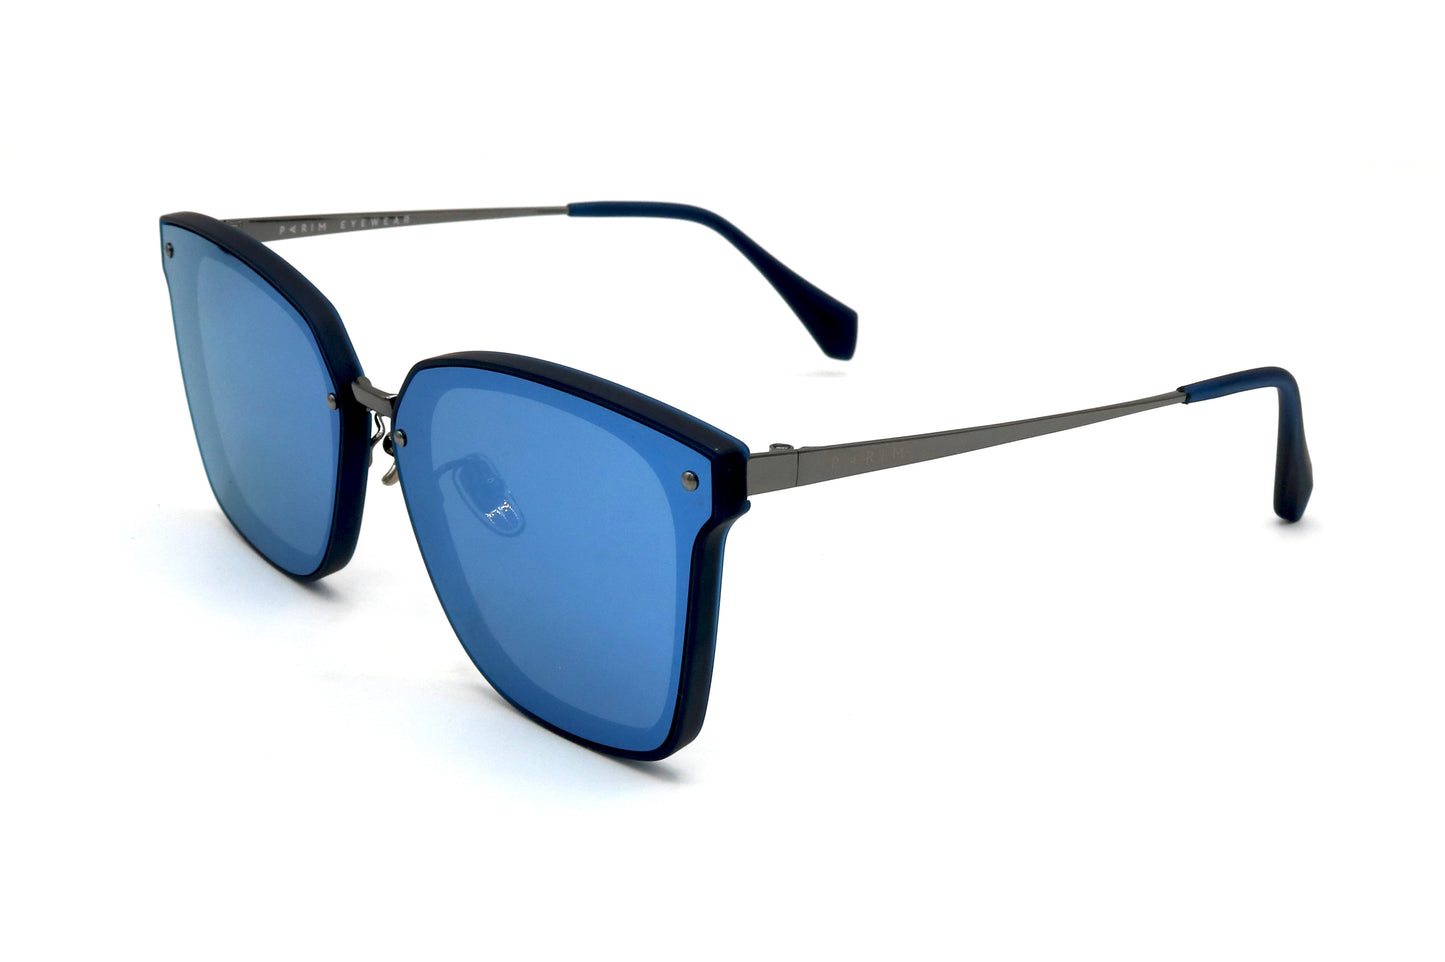 NS Deluxe - 73407 - Blue - Sunglasses